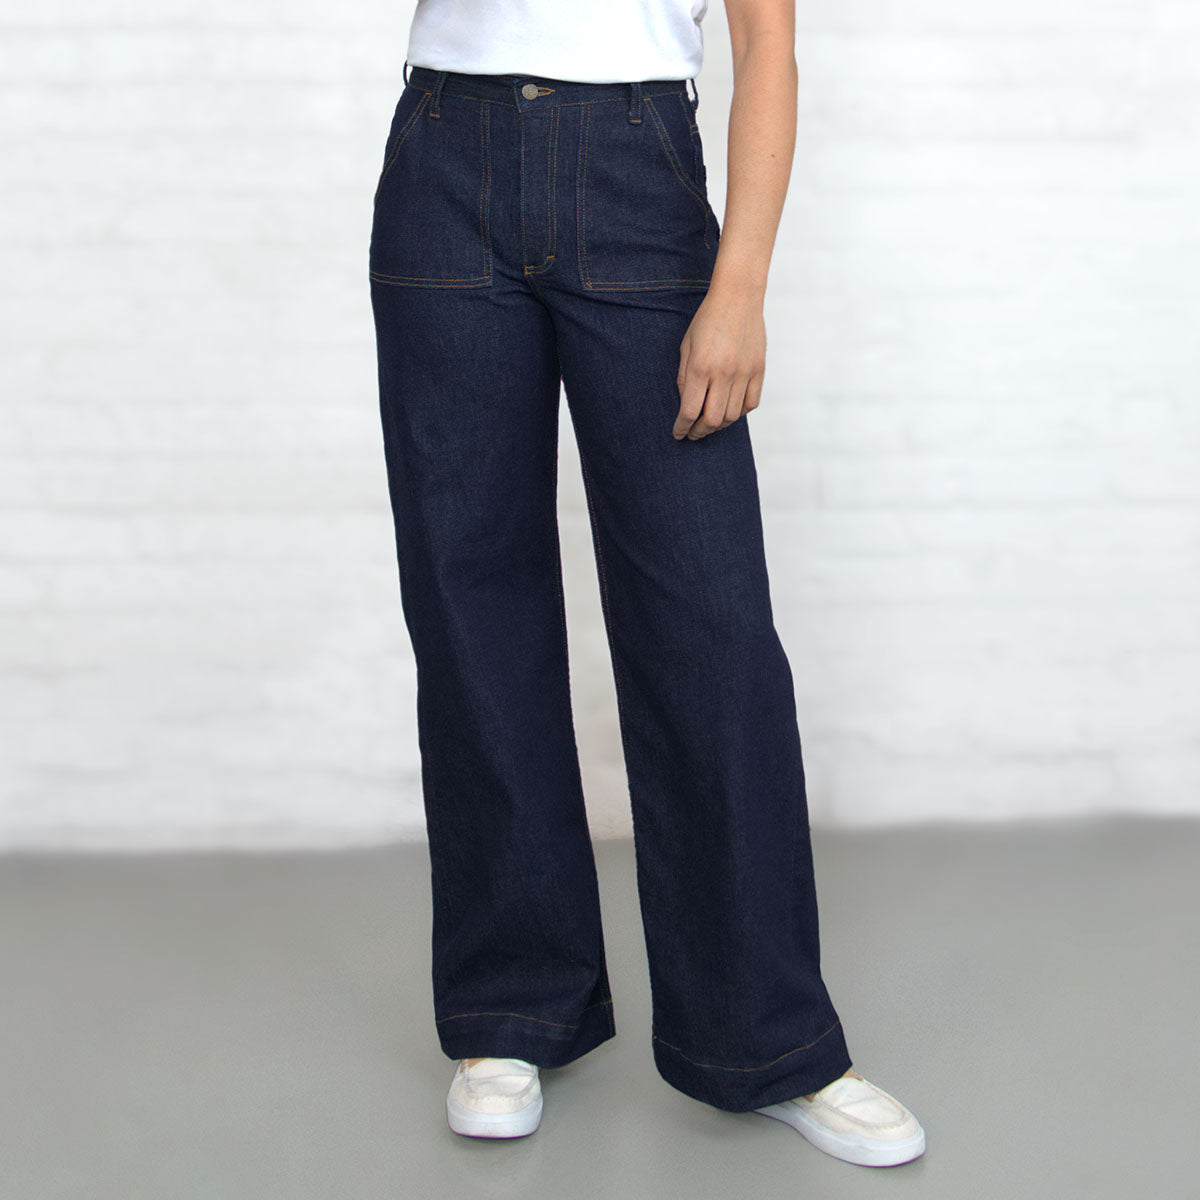 Cargo Pants-wholesale jeans,Fashion jeans We are a jeans factory